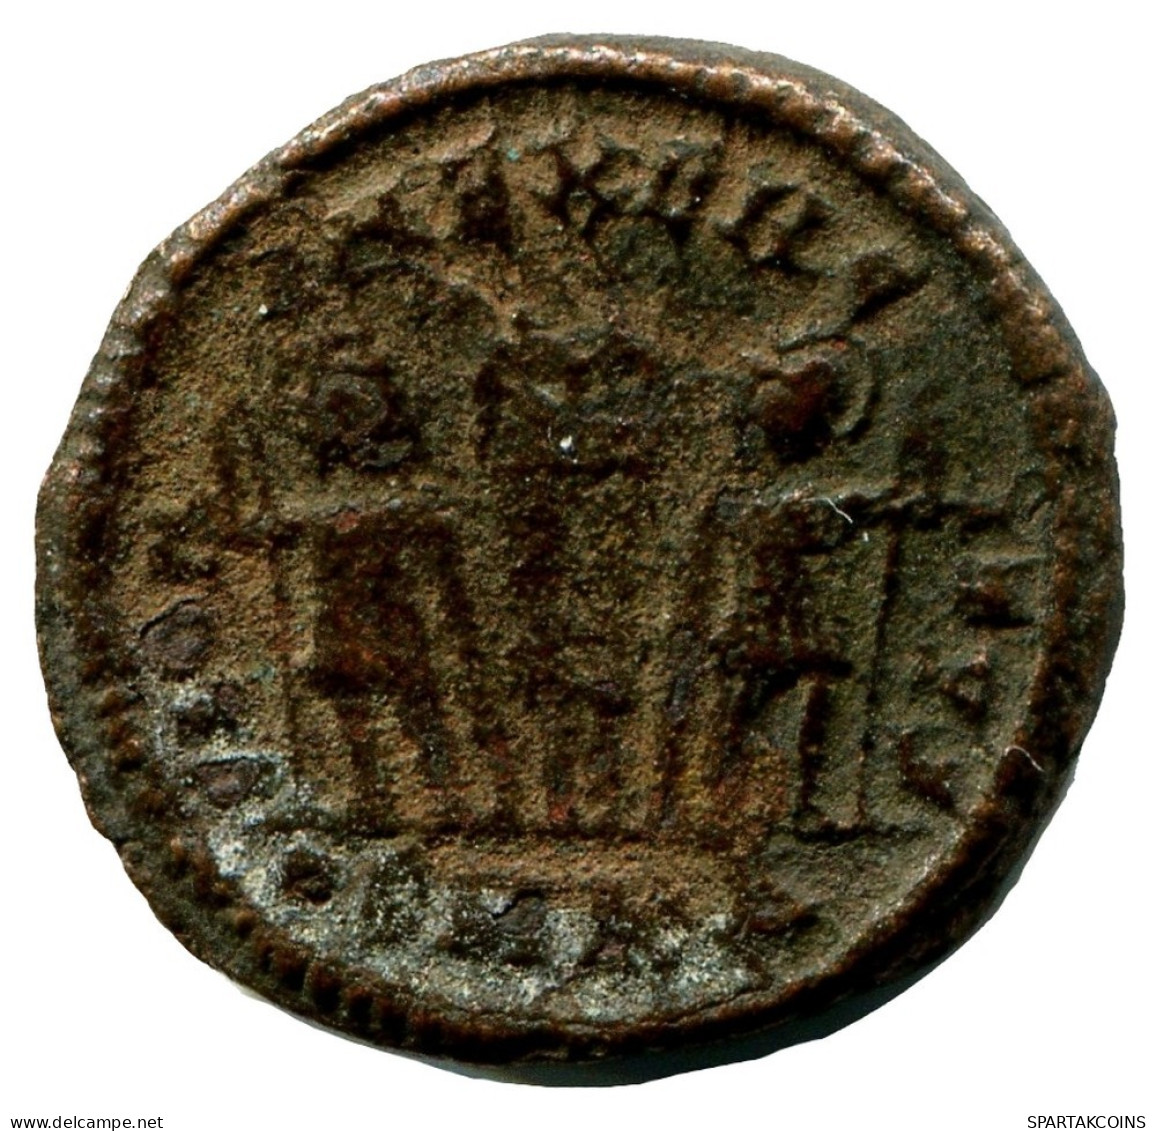 CONSTANTINE I MINTED IN CYZICUS FROM THE ROYAL ONTARIO MUSEUM #ANC11017.14.U.A - Der Christlischen Kaiser (307 / 363)